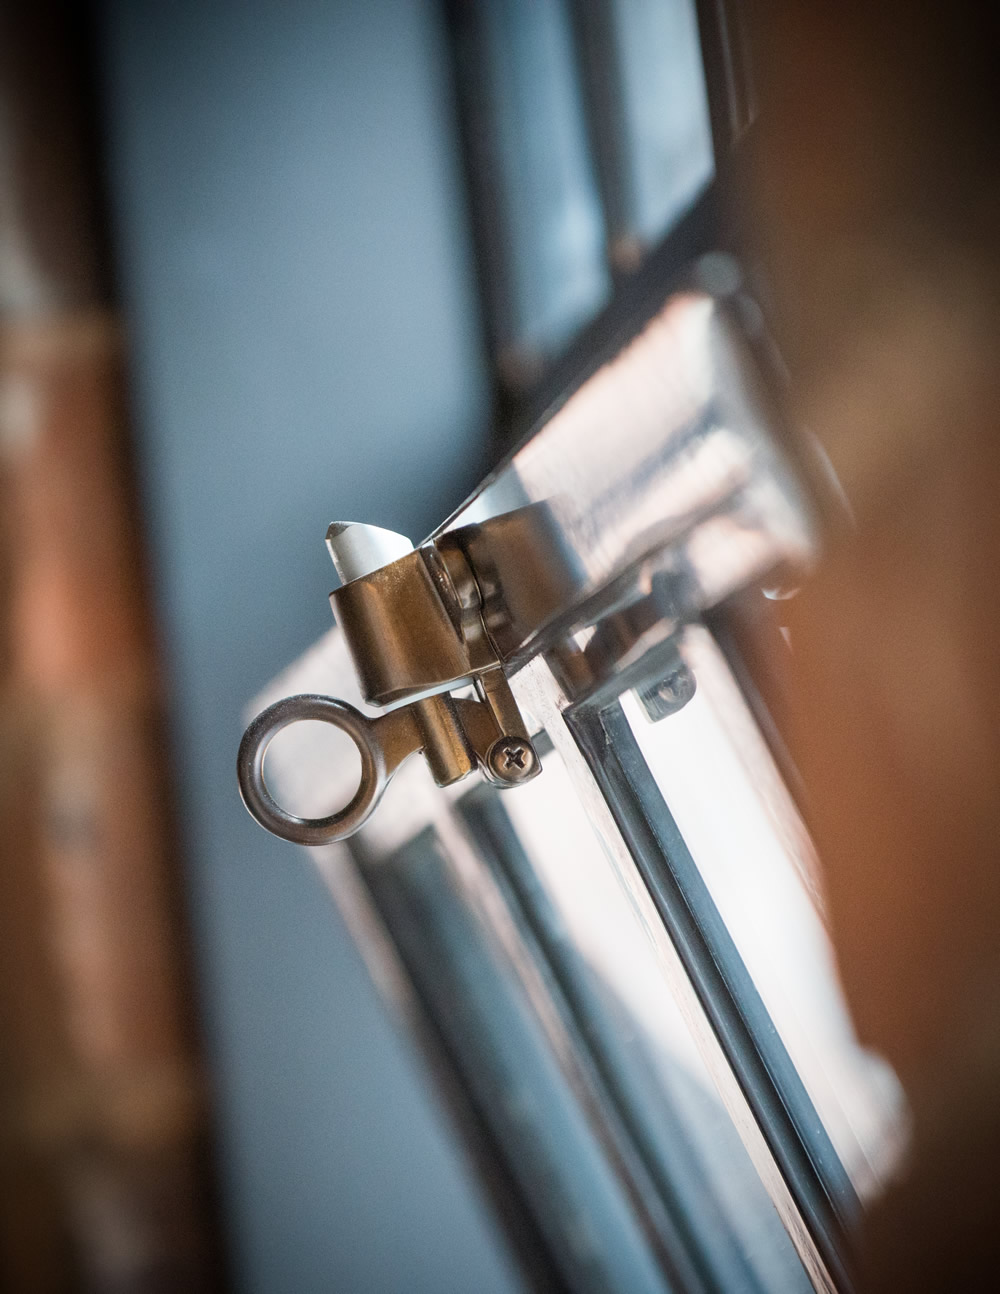 Our windows are fitted with matching metal locks and handles